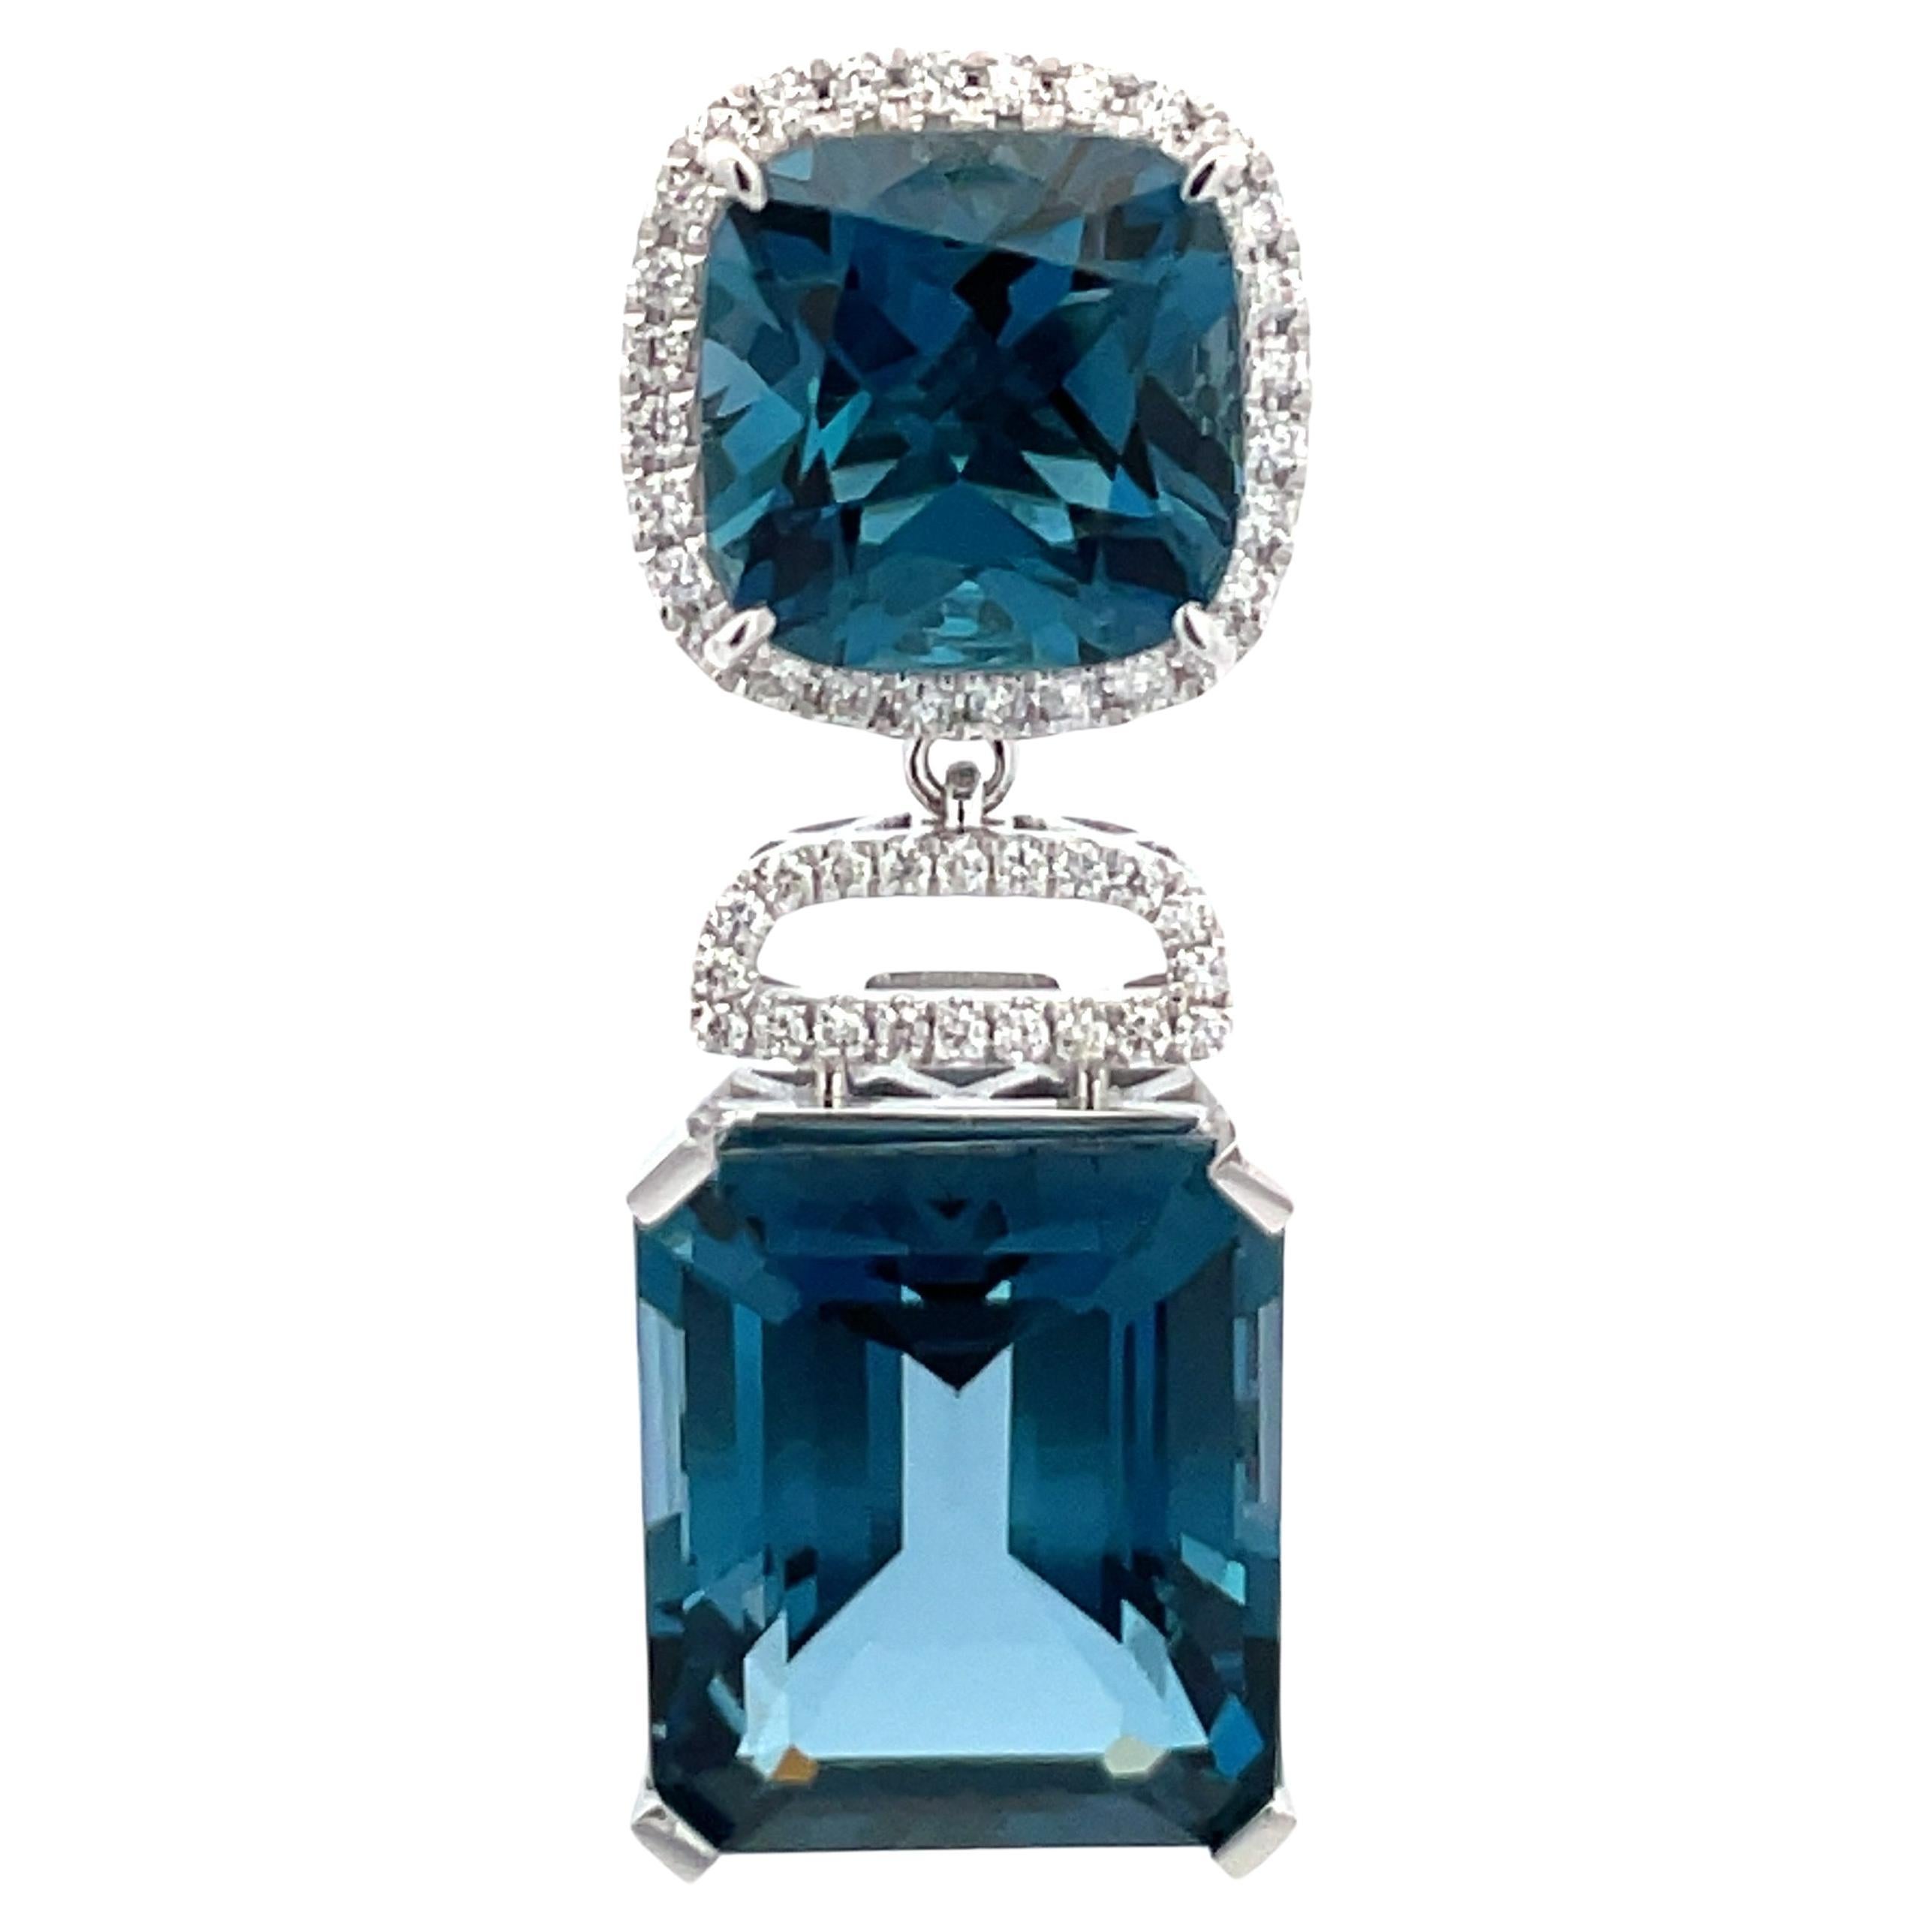 14 Karat White Gold drop earrings featuring two Cushion London Blue Topaz weighing 9.83 Carats, to Emerald Cut weighing 25.34 and a diamond halo containing 96 round brilliants, 0.55 carats.